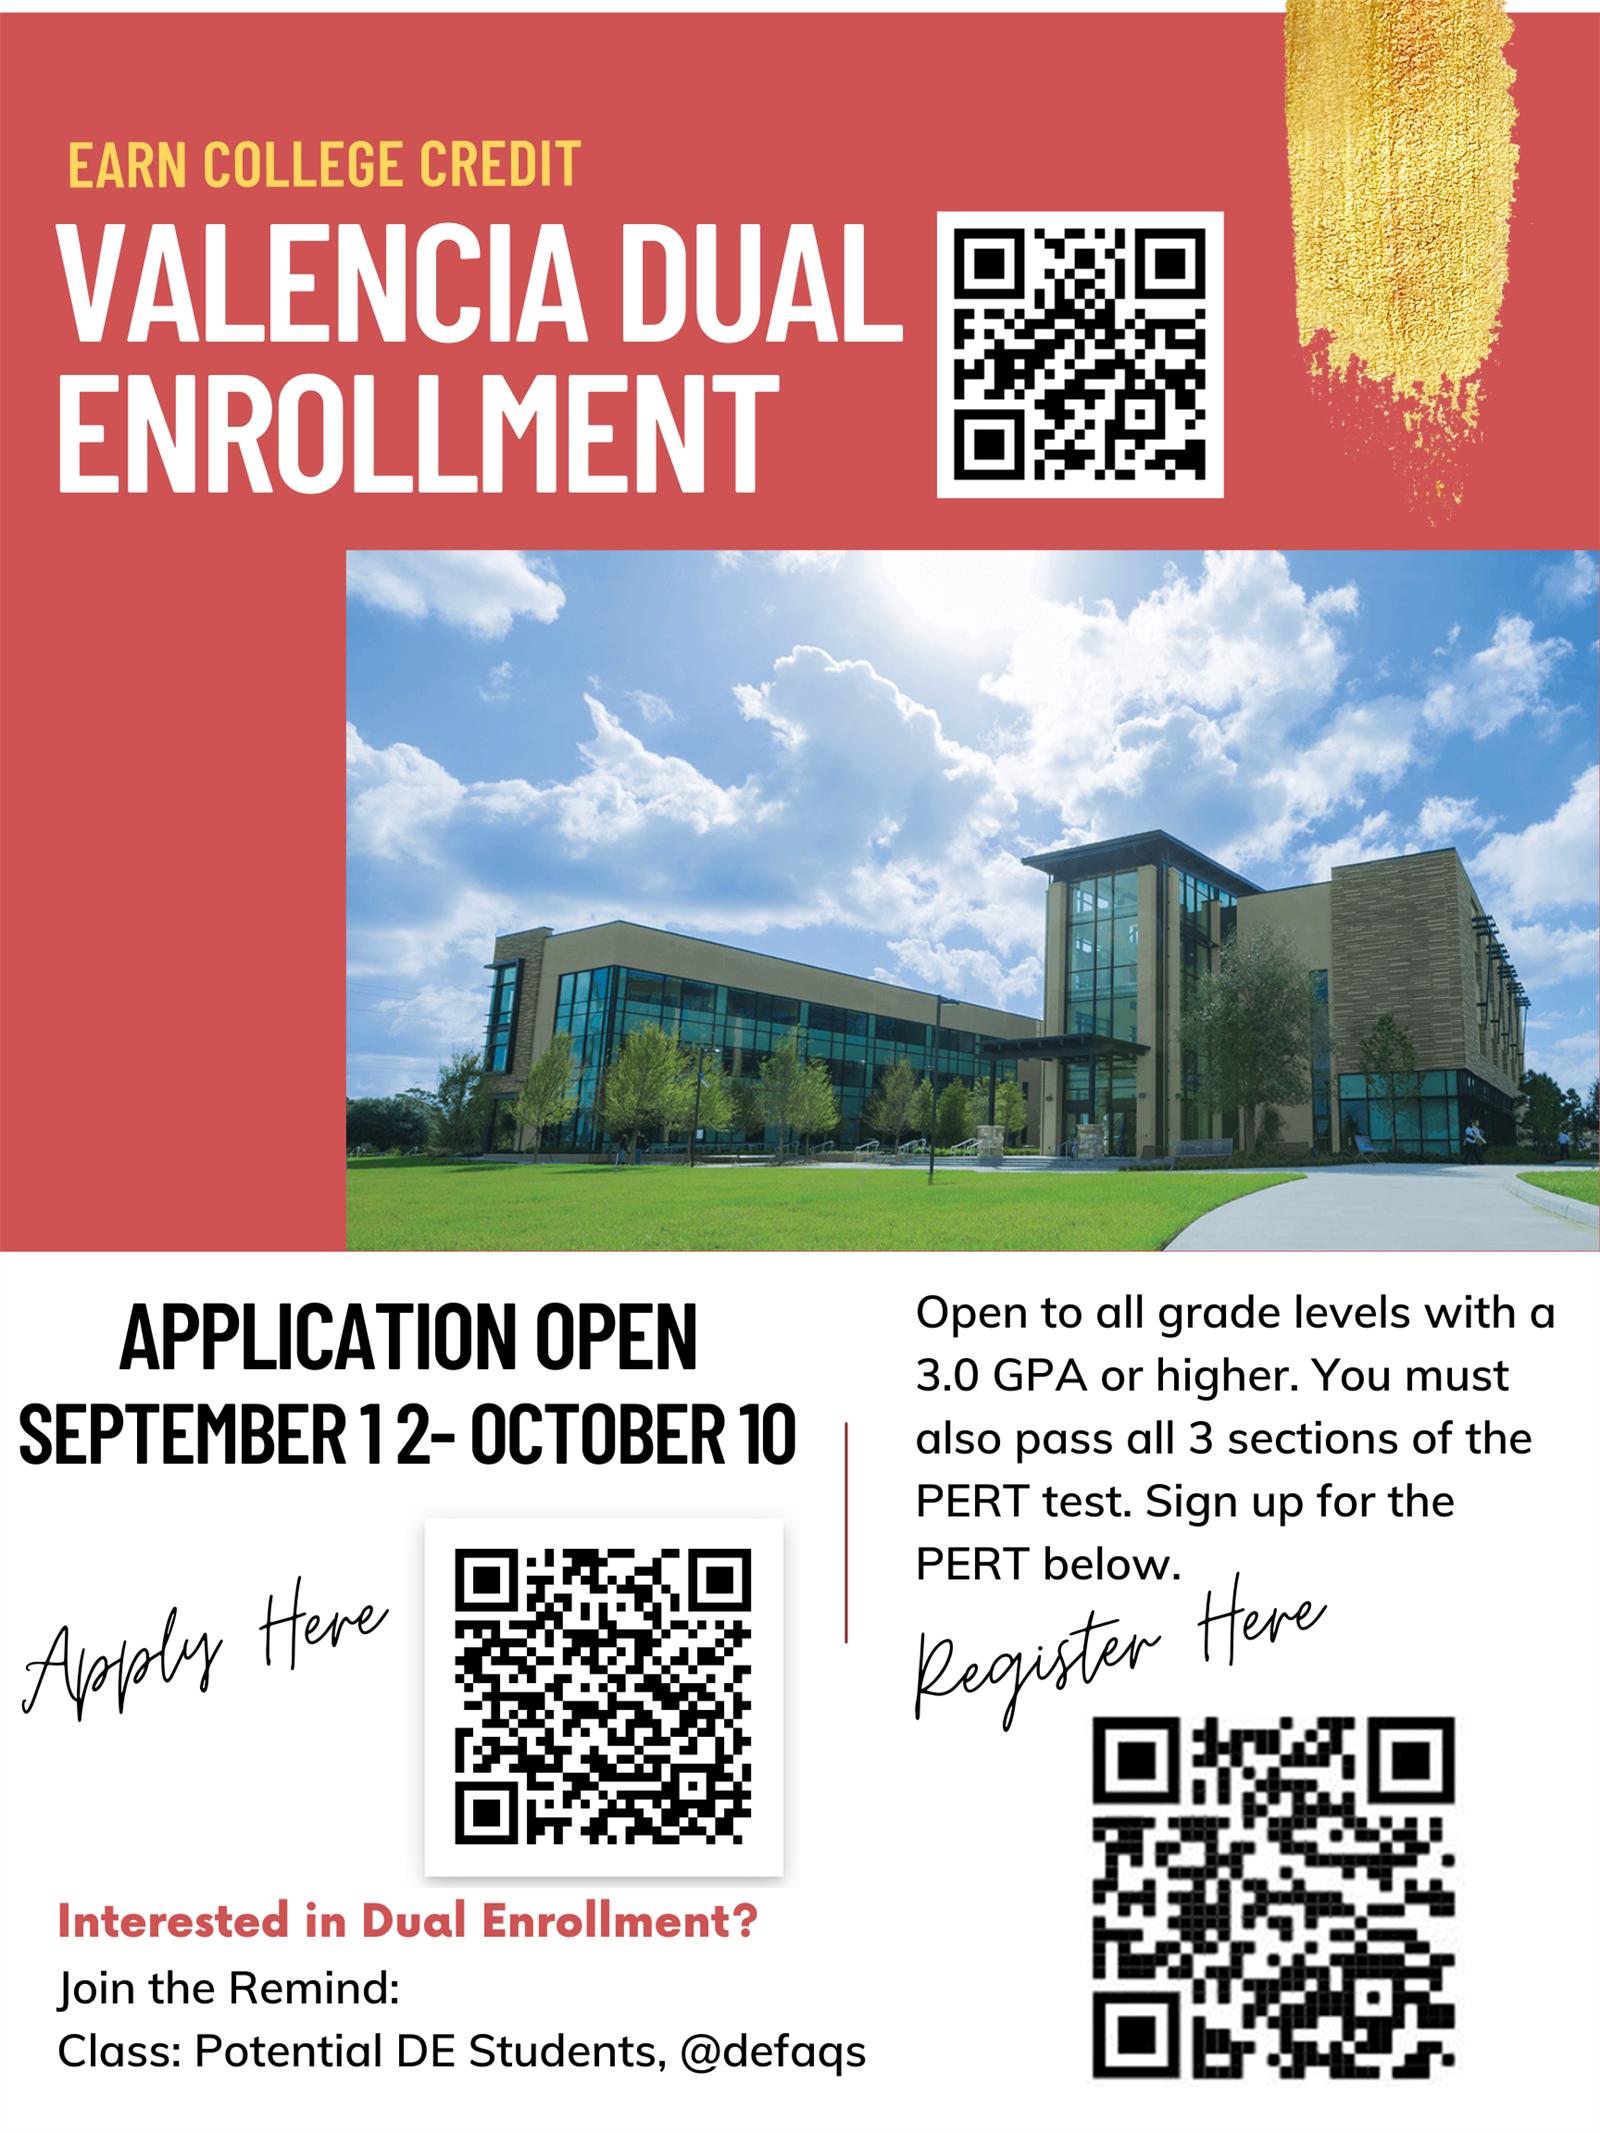  The Valencia Dual Enrollment Application Opens Today!